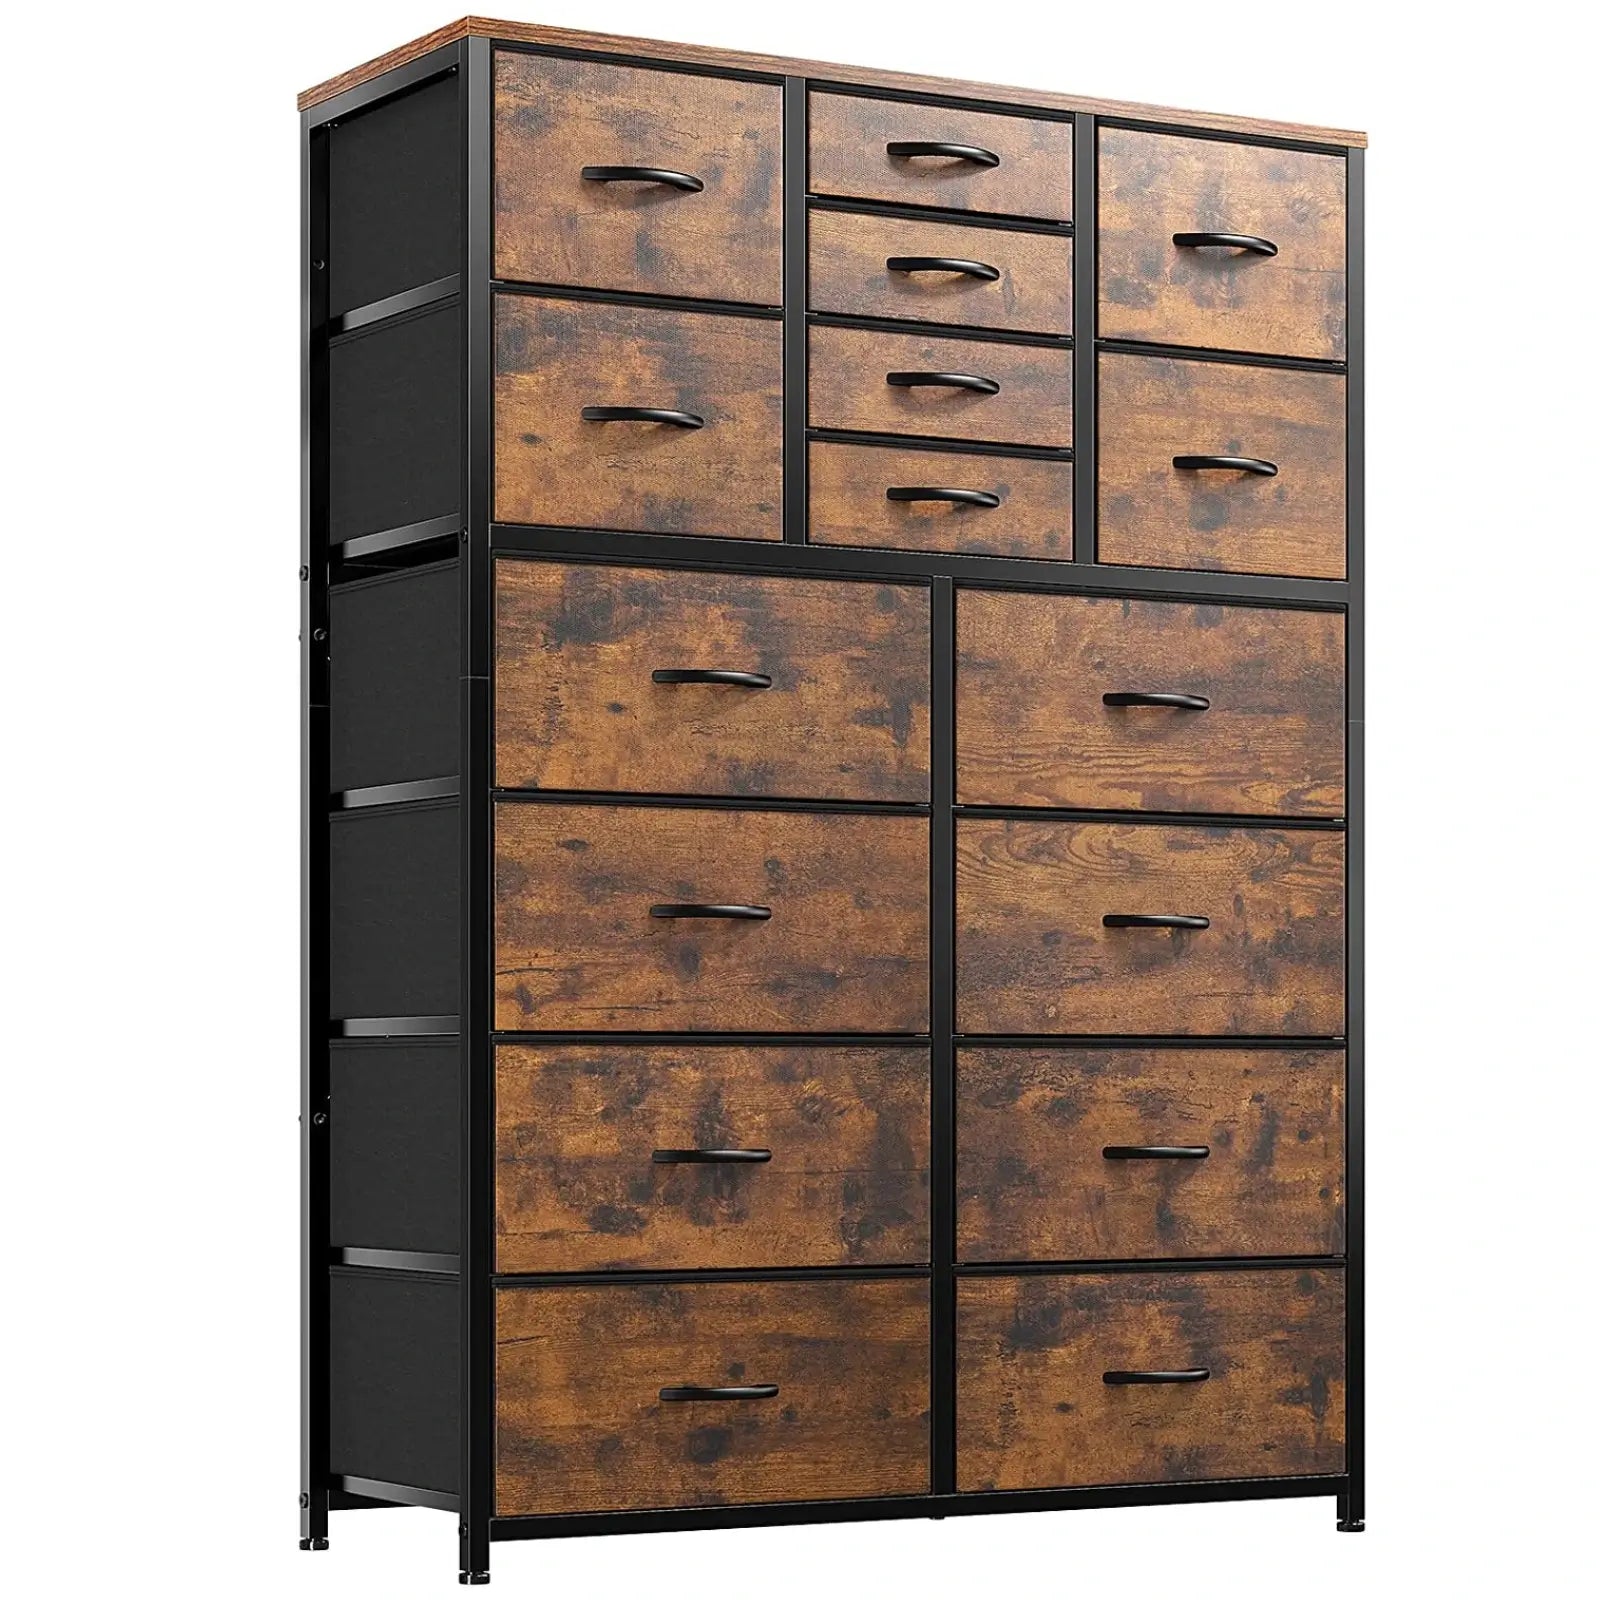 Enhomee Tall Dresser for Bedroom, 16 Deep Drawers Large Dresser, Brown Double Dresser, Chest of Drawers for Closet, Highboy